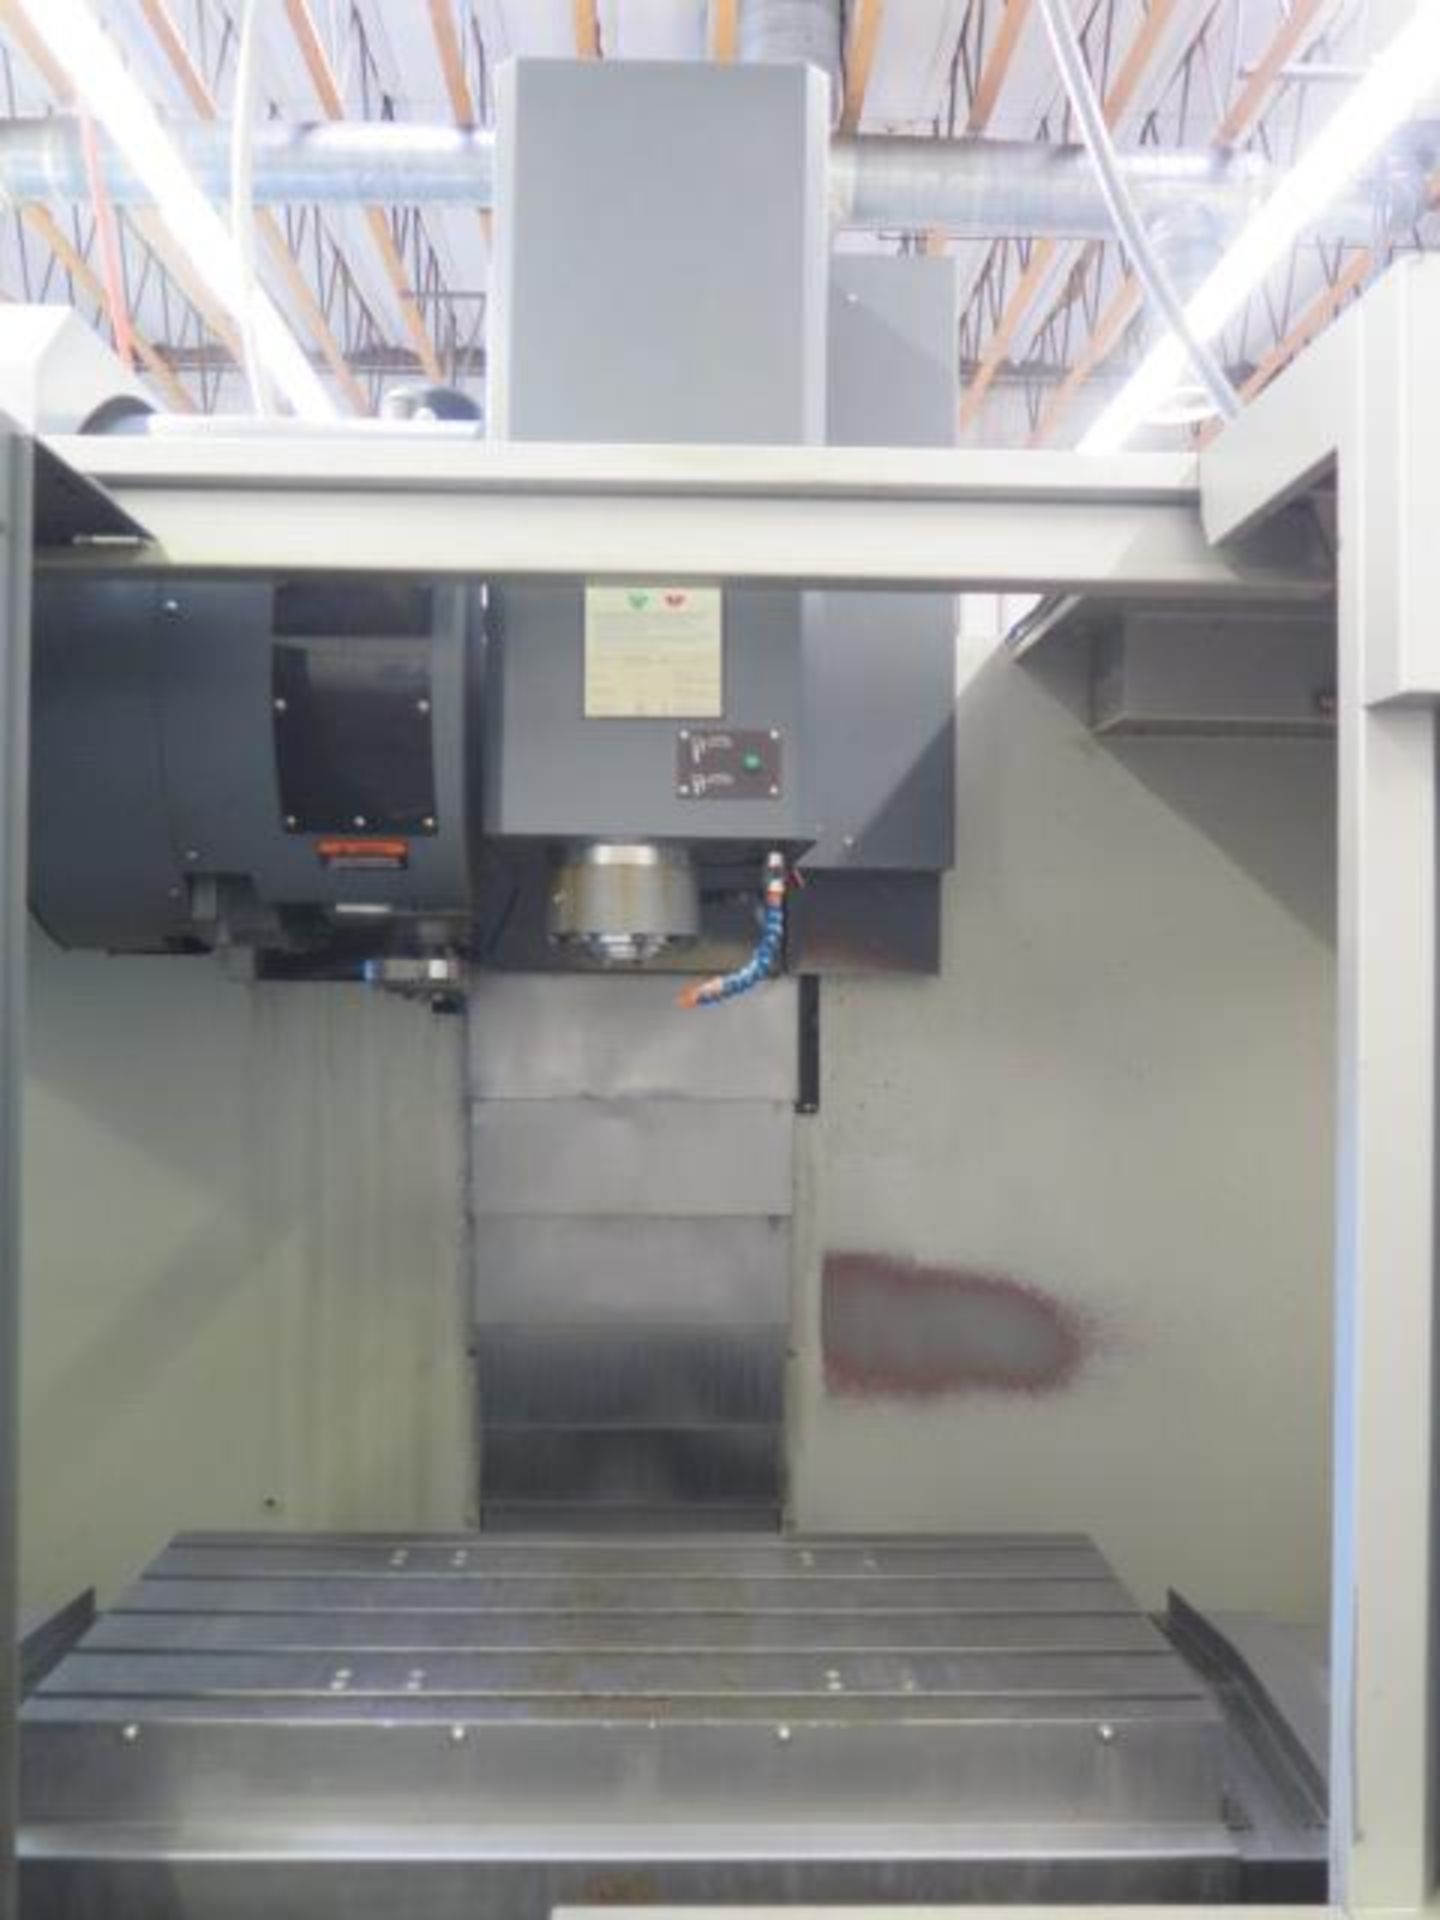 2011 Leadwell V-40 CNC VMC w/ Fanuc Series 0i-MD Controls, Hand Wheel, 24 ATC, SOLD AS IS - Image 4 of 13